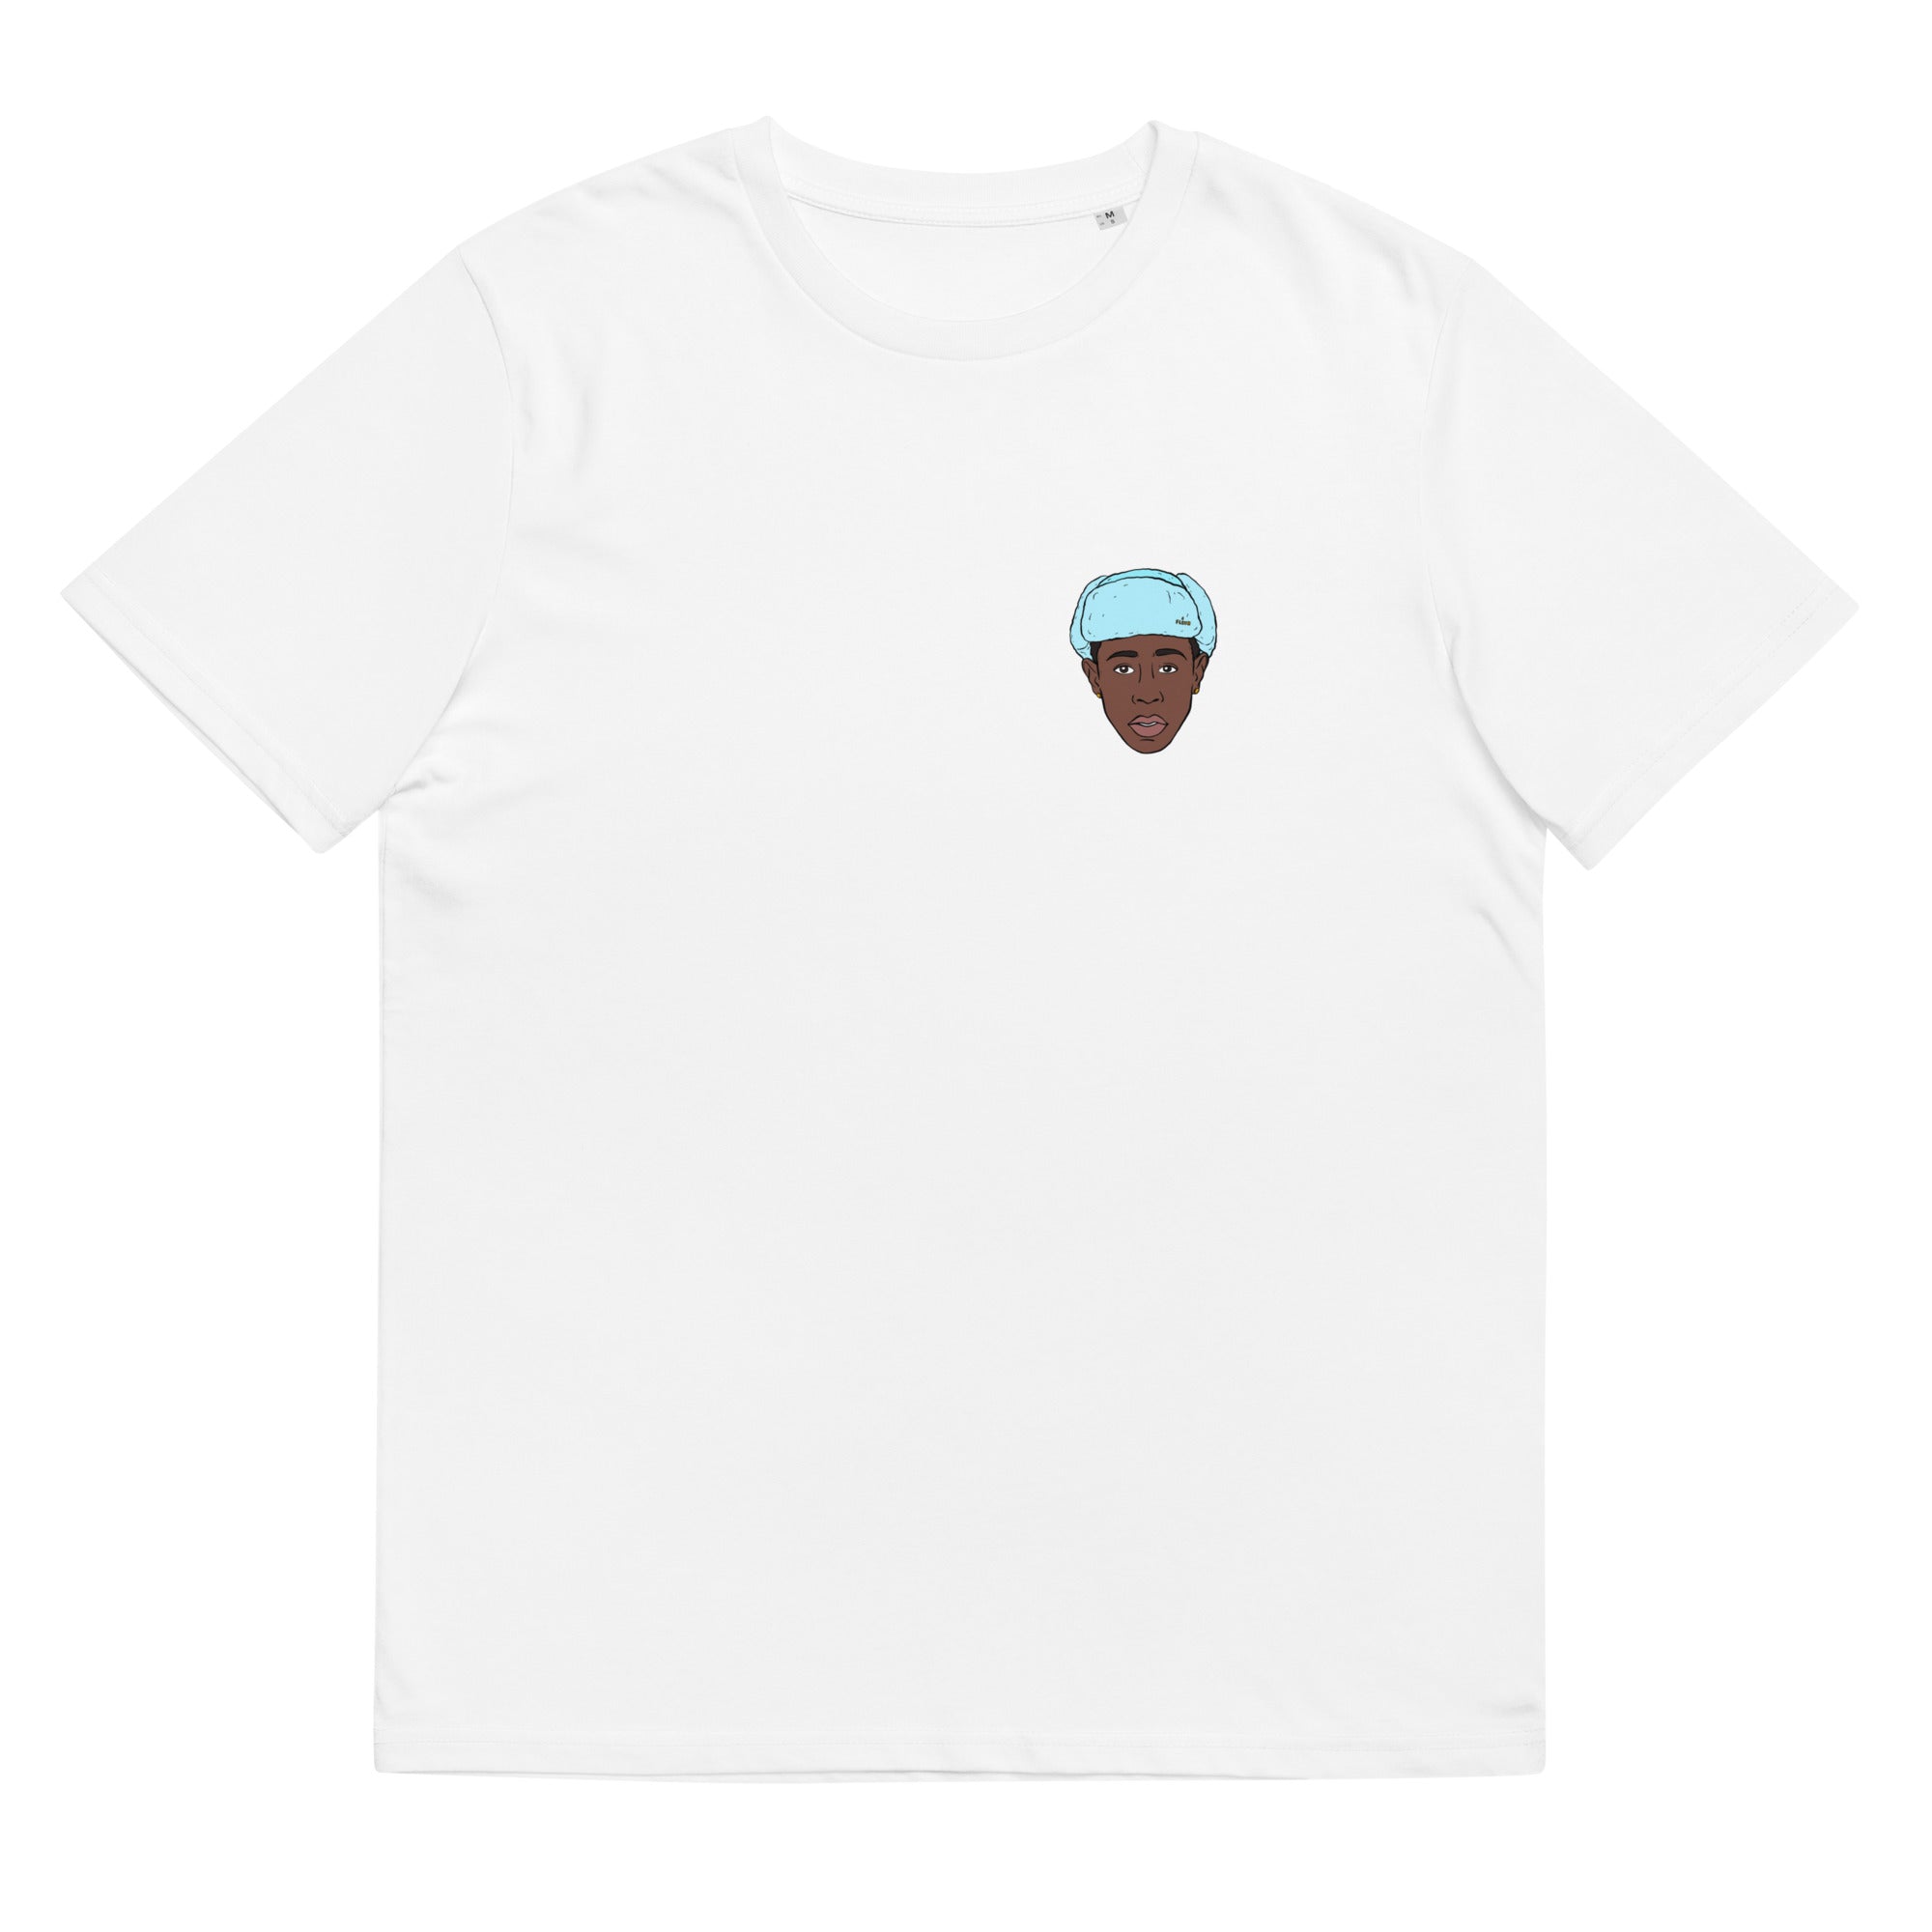 Tyler, the Creator - Call me if you get lost t-shirt